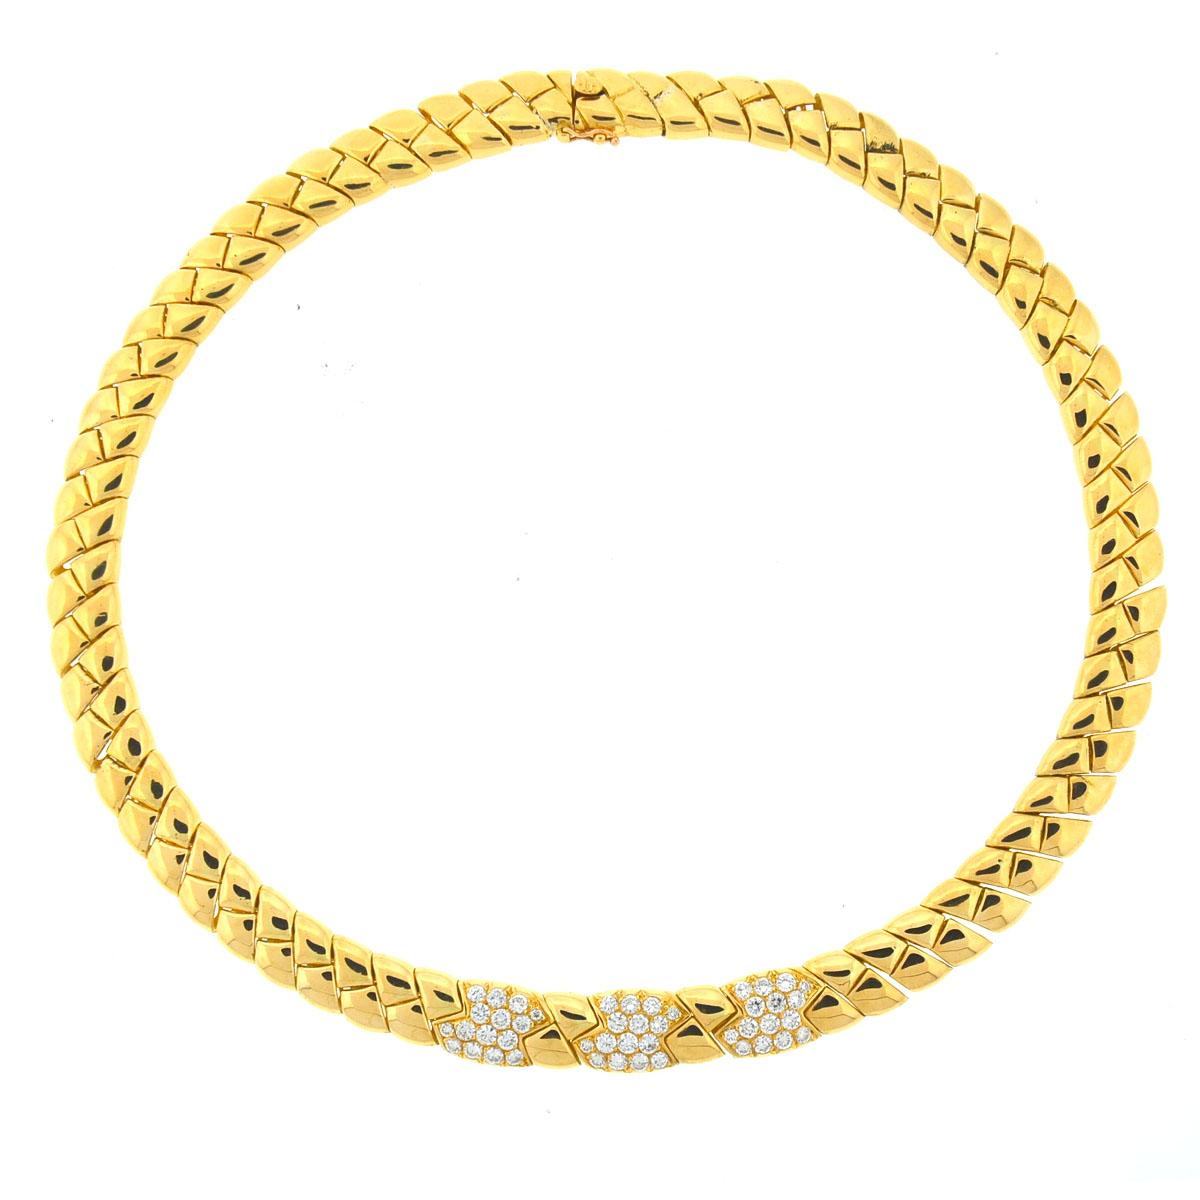 Company - Van Cleef & Arpels
Style - 18k Yellow Gold Vintage Diamond Choker Necklace
Metal - 18k Yellow Gold
Length - 16